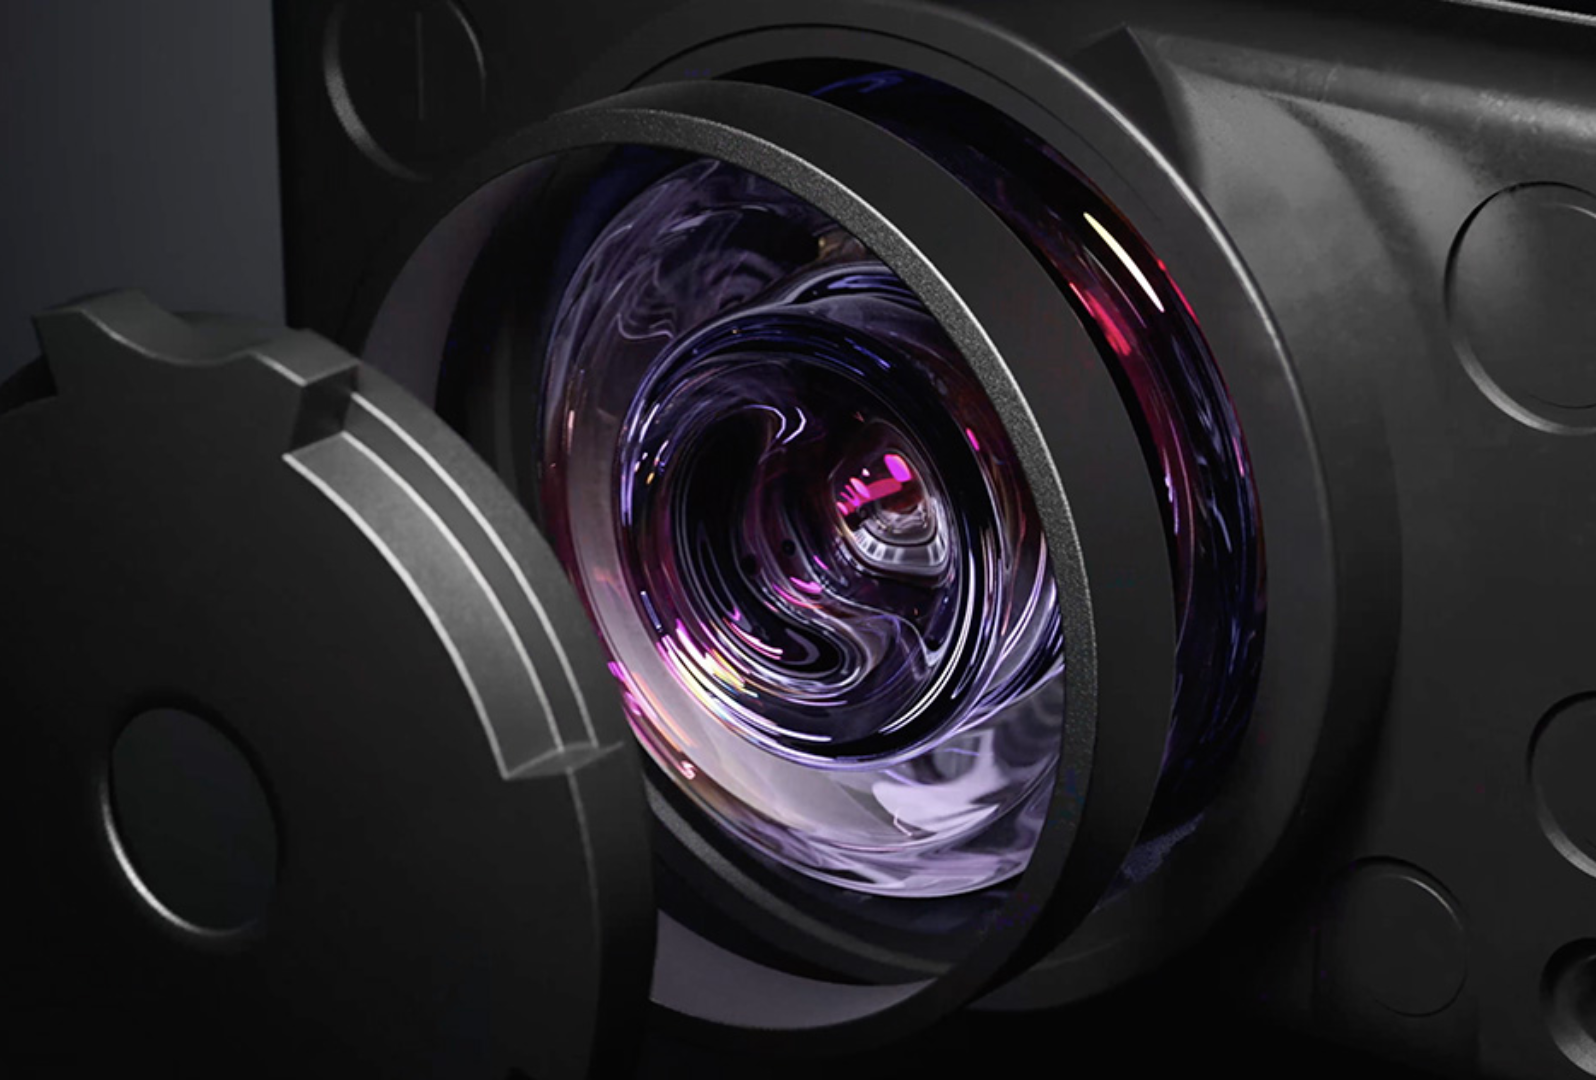 A close-up rendering of a deconstructed device camera